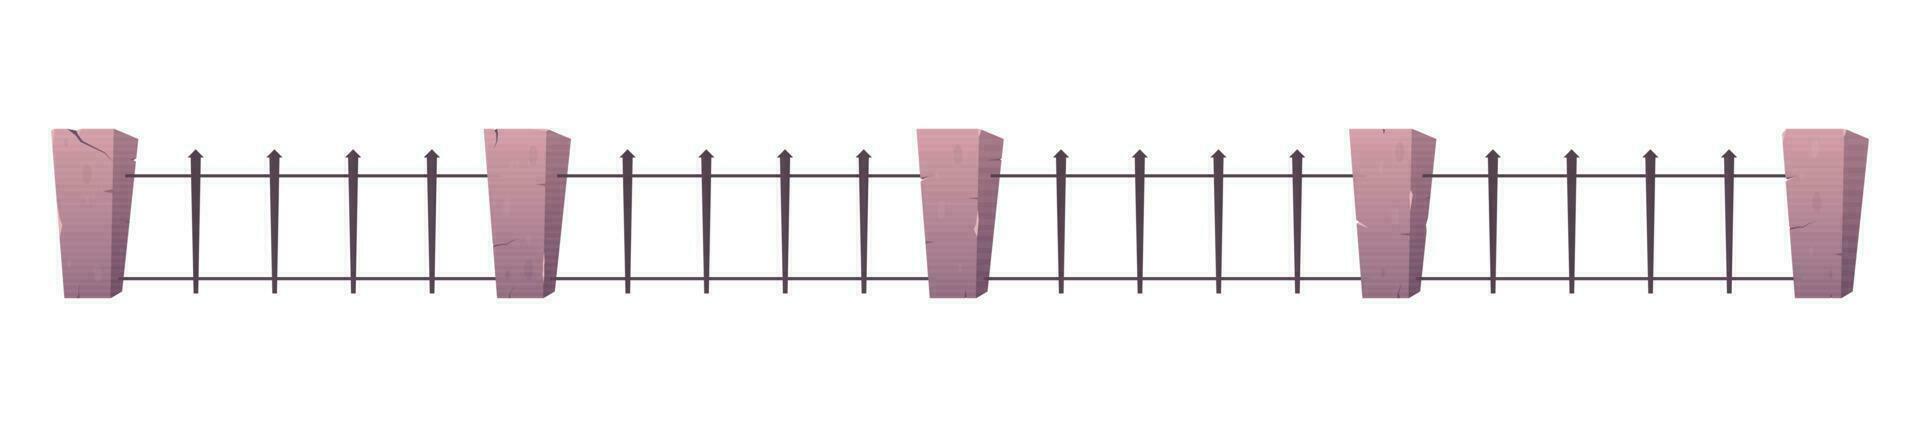 Steel fence with concrete posts in cartoon style vector